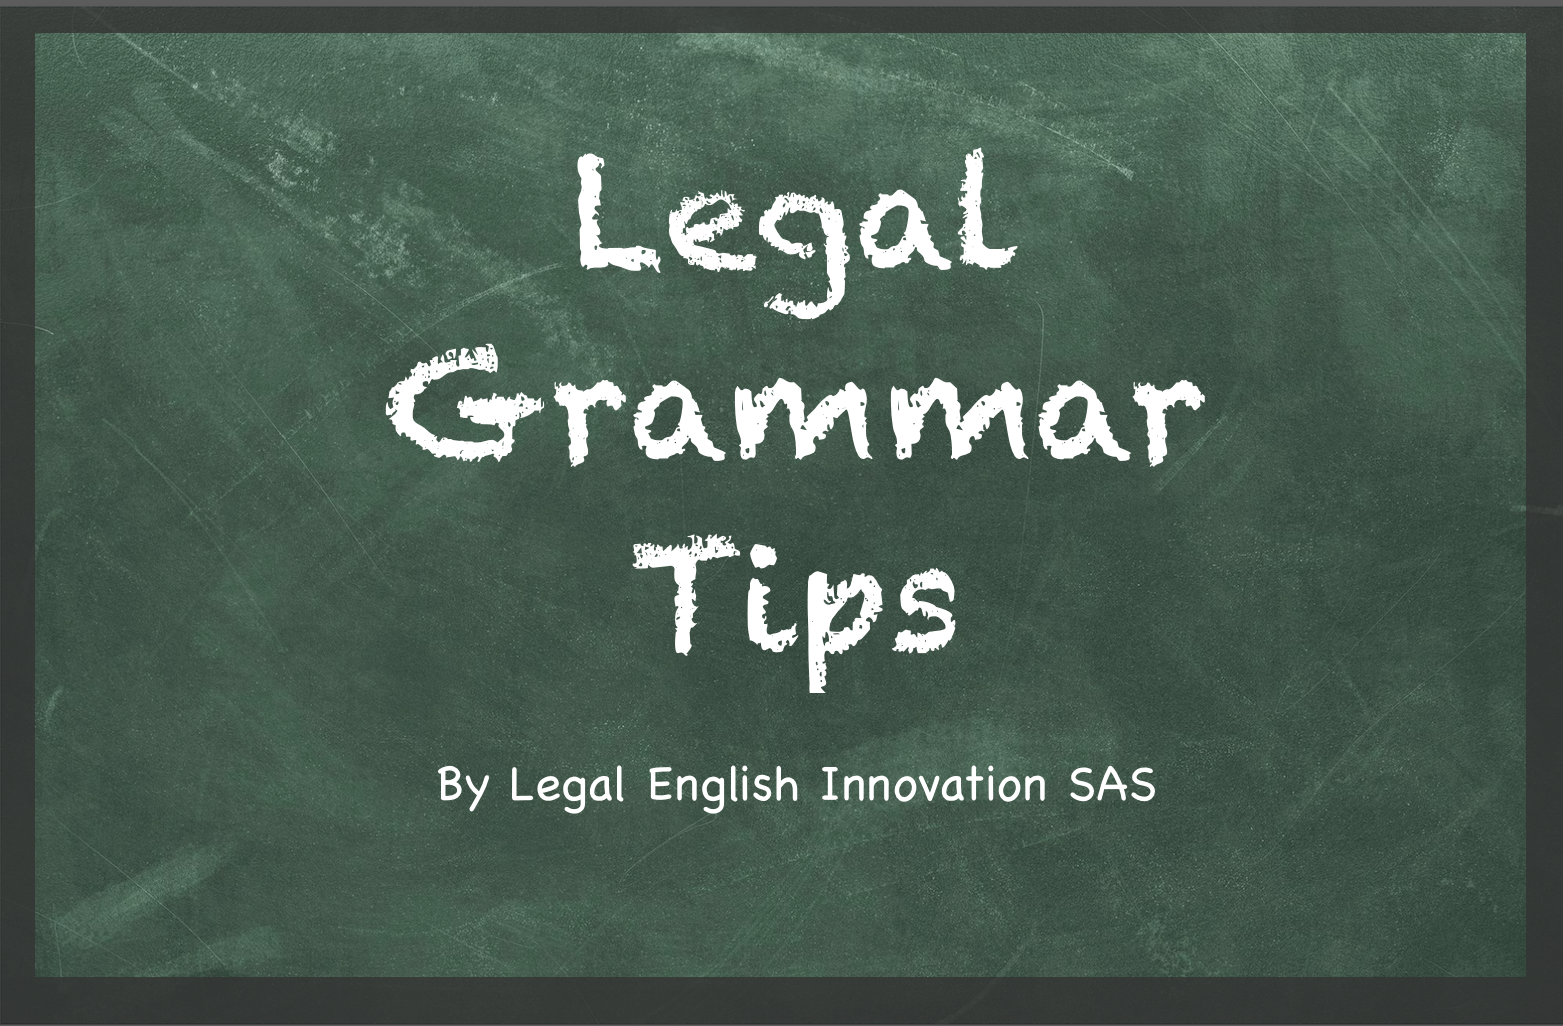 What are i.e., and e.g., in legal English?